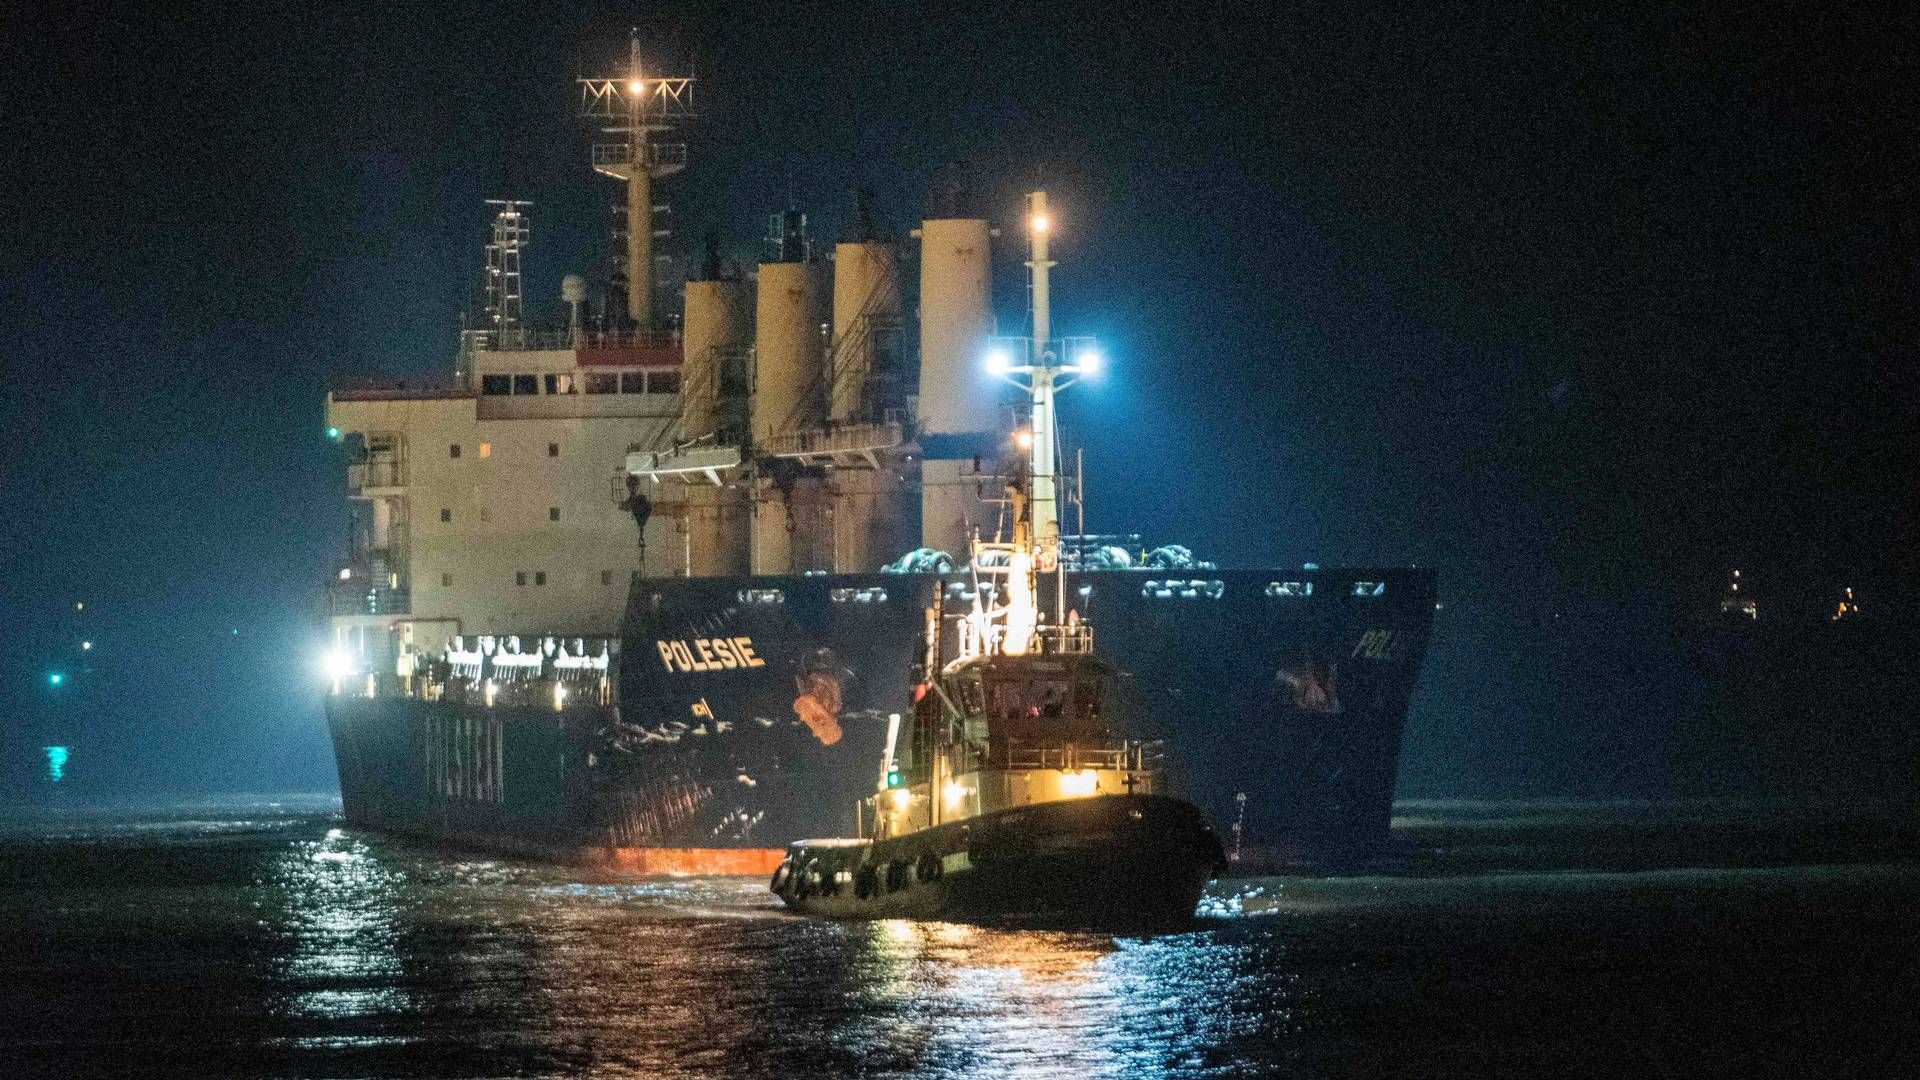 The cargo ship "Polesie" is guided into the harbour of Cuxhaven, northern Germany, on early October 25, 2023, after it collided with another cargo ship, the "Verity", in the North Sea near the Heloland island, on October 24, 2023. | Photo: Rene Schroder/AFP/Ritzau Scanpix